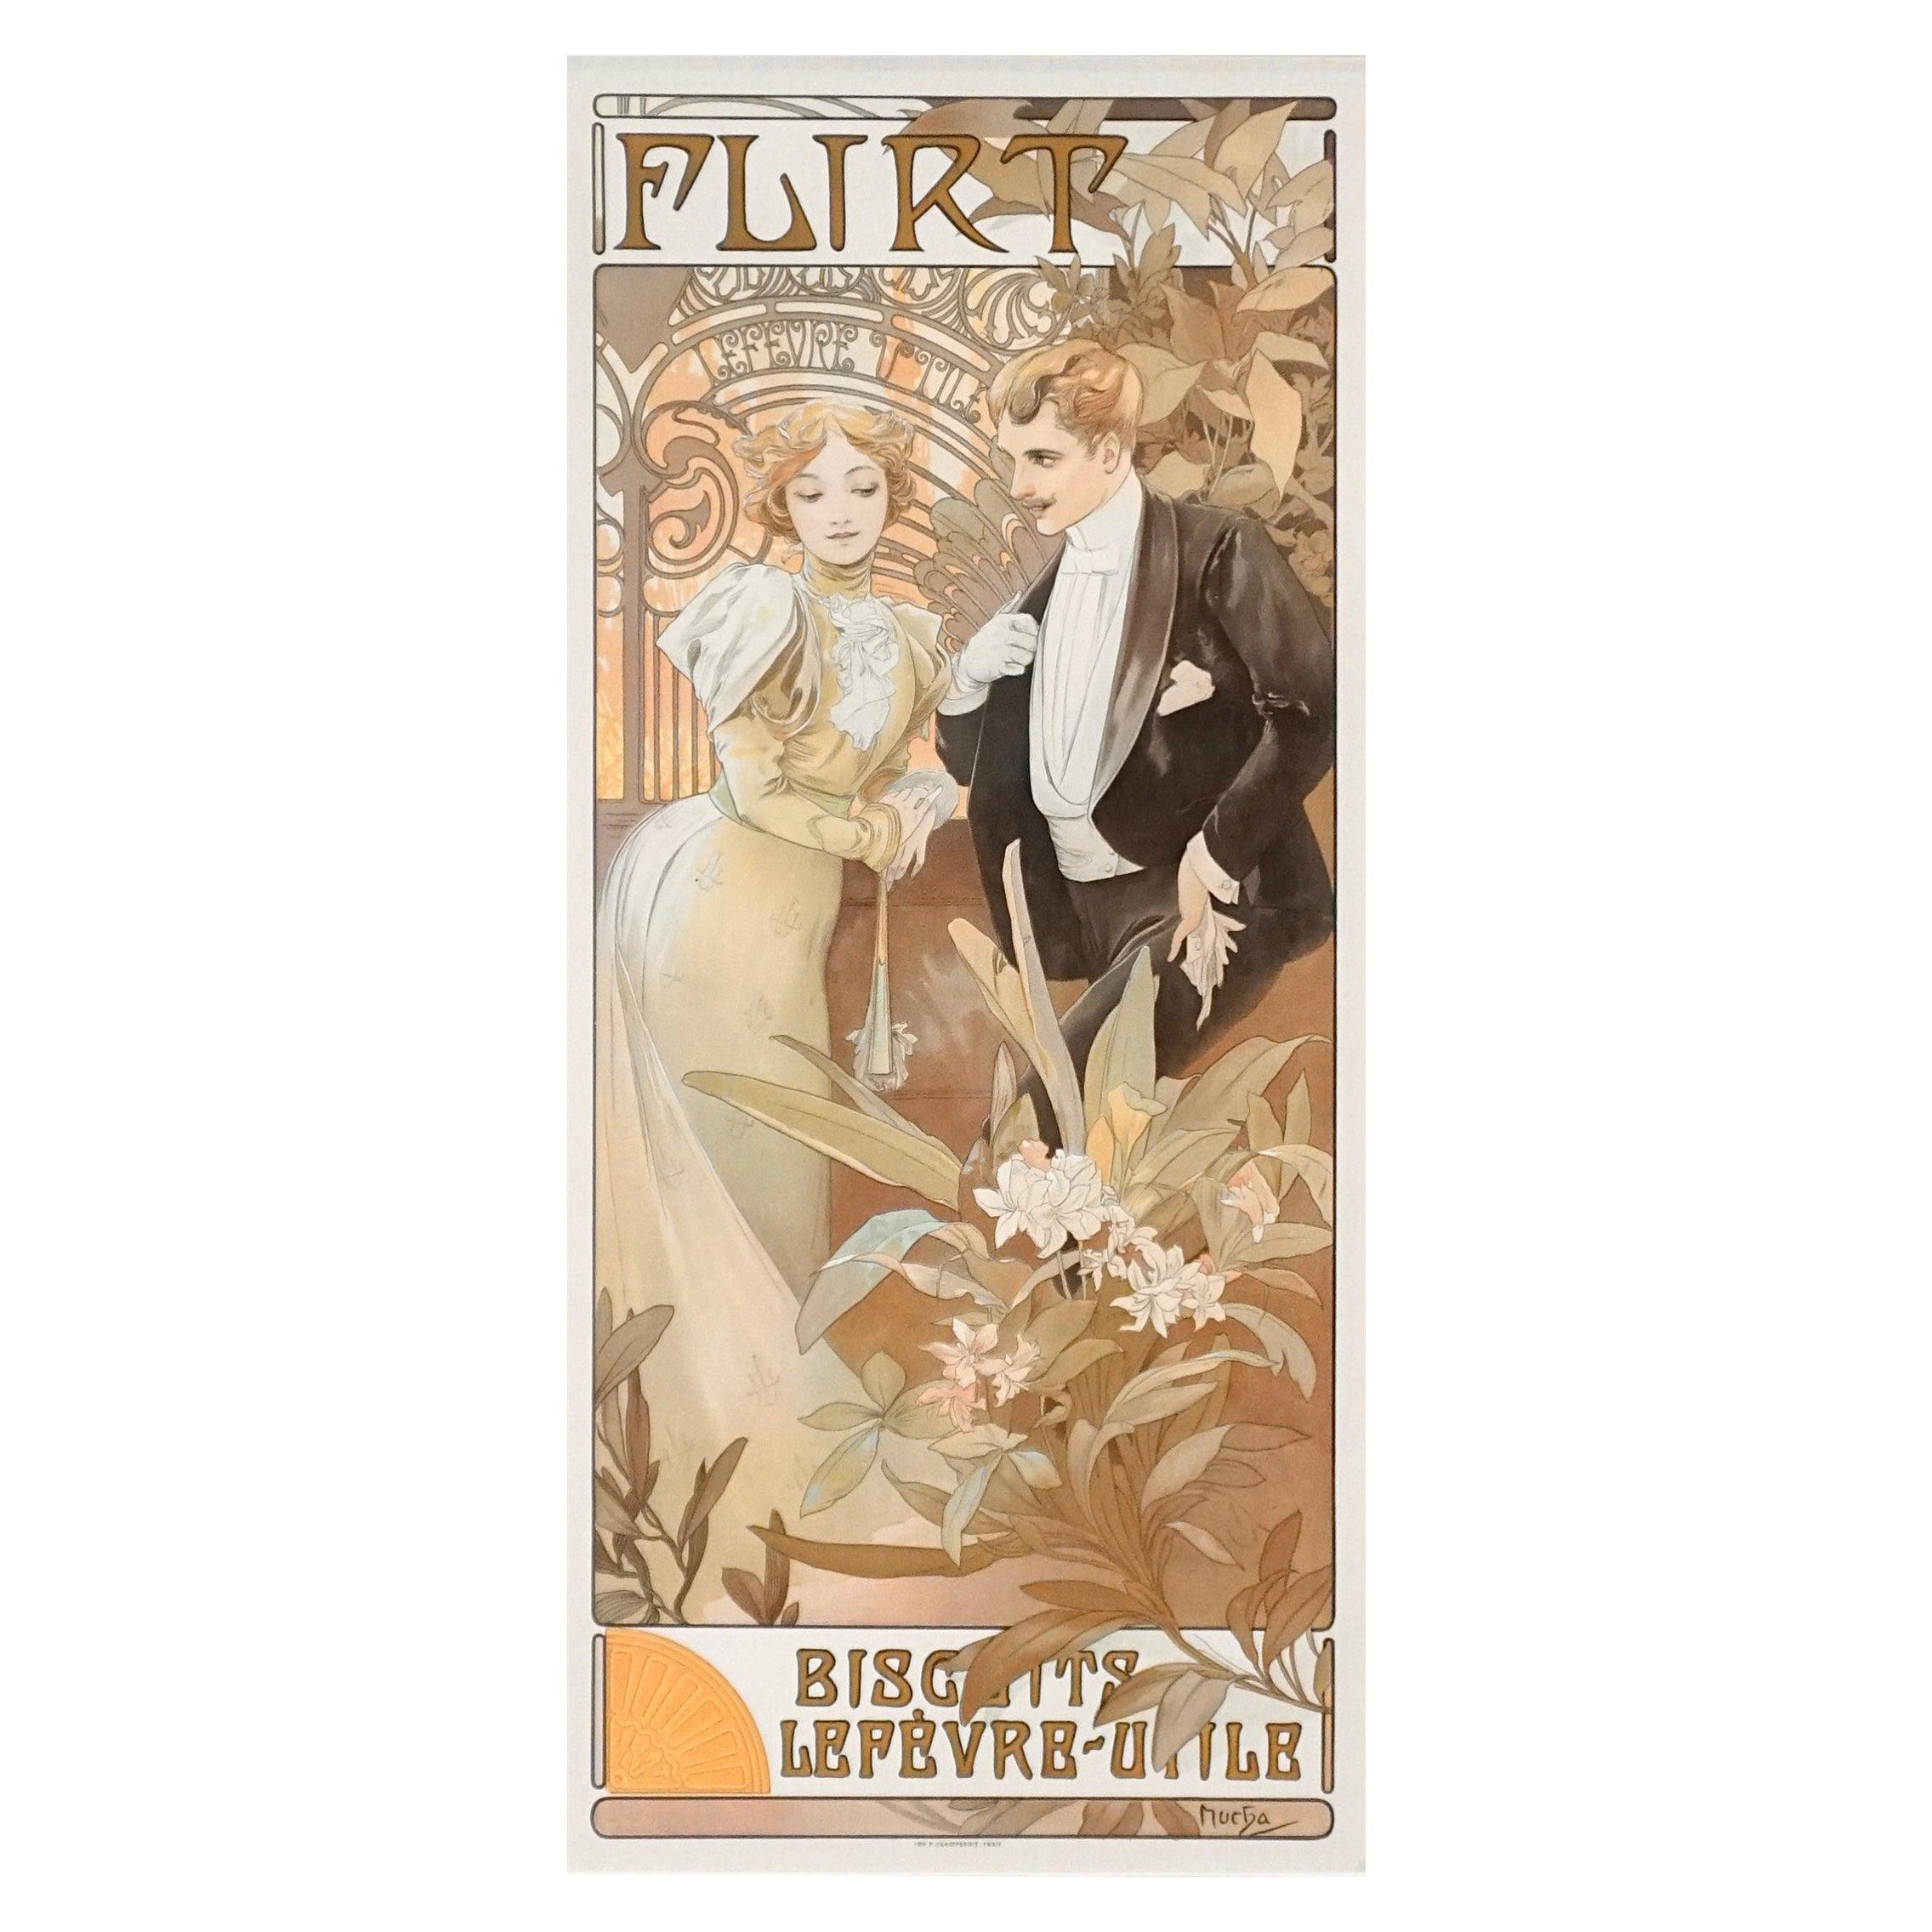 Alphonse Mucha (Czech, 1860-1939) Flirt Biscuits Lefevre Utile.
1899, Lithograph in colors on wove paper. Linen backed.
Imp F. Champenois Paris.
Measures : sheet: 24.75 x 11.75 inches.
frame: 35.75 x 22.5 inches.
Condition: Excellent with tape